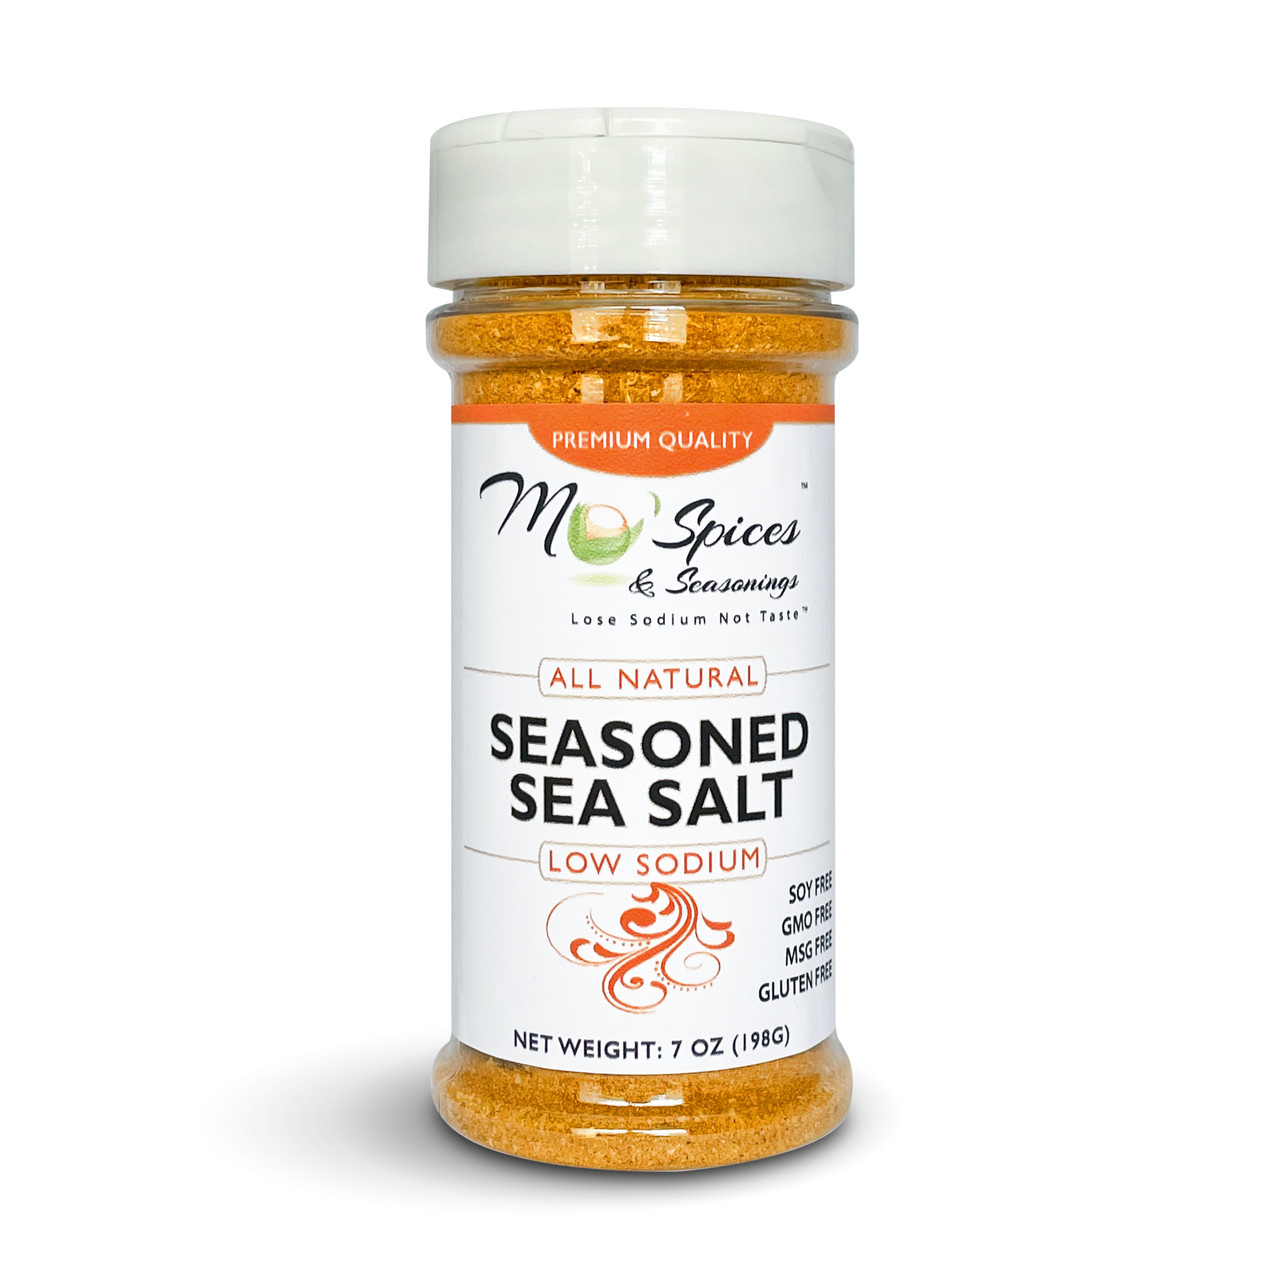 Southwest Spice Blend | Gourmet Spices with Sea Salt | Healthy to Add to  Any Dish | Low Sodium, No Gluten, No MSG, No-Sugar | 5oz